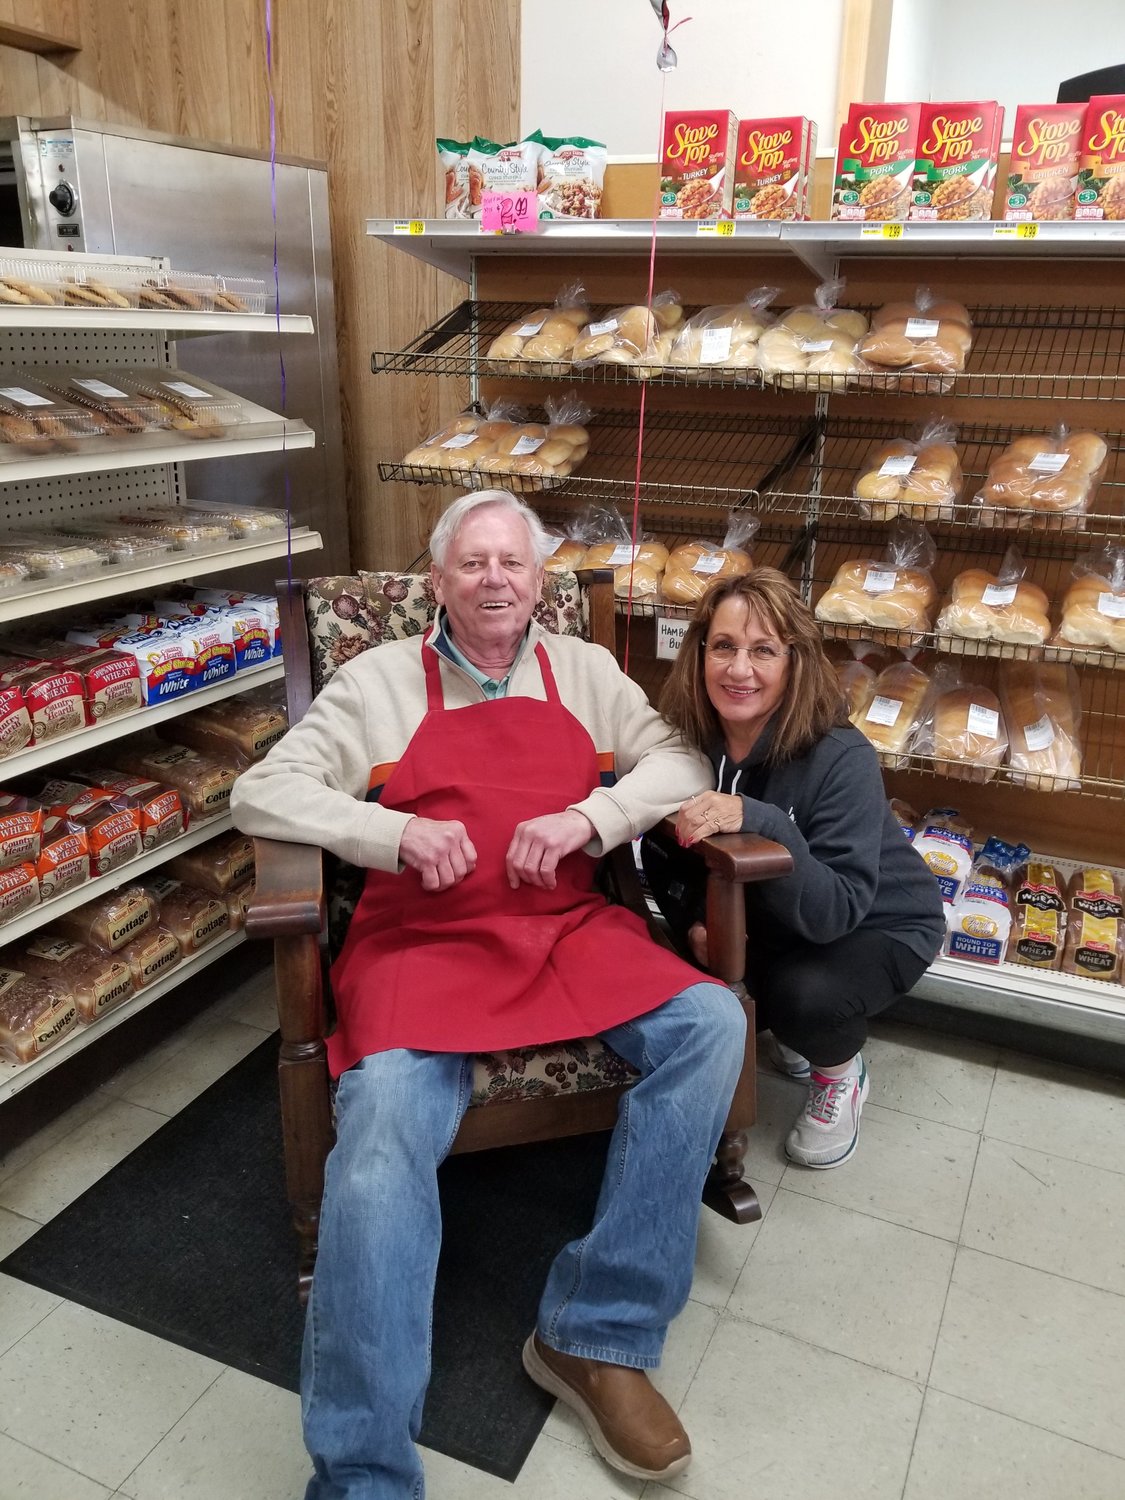 Don Schulte, pictured with his wife, Mary, has owned and operated Don’s Foods in Goodhue since 1991.  He celebrated his 75th birthday and his retirement from the grocery business on October 12th. 